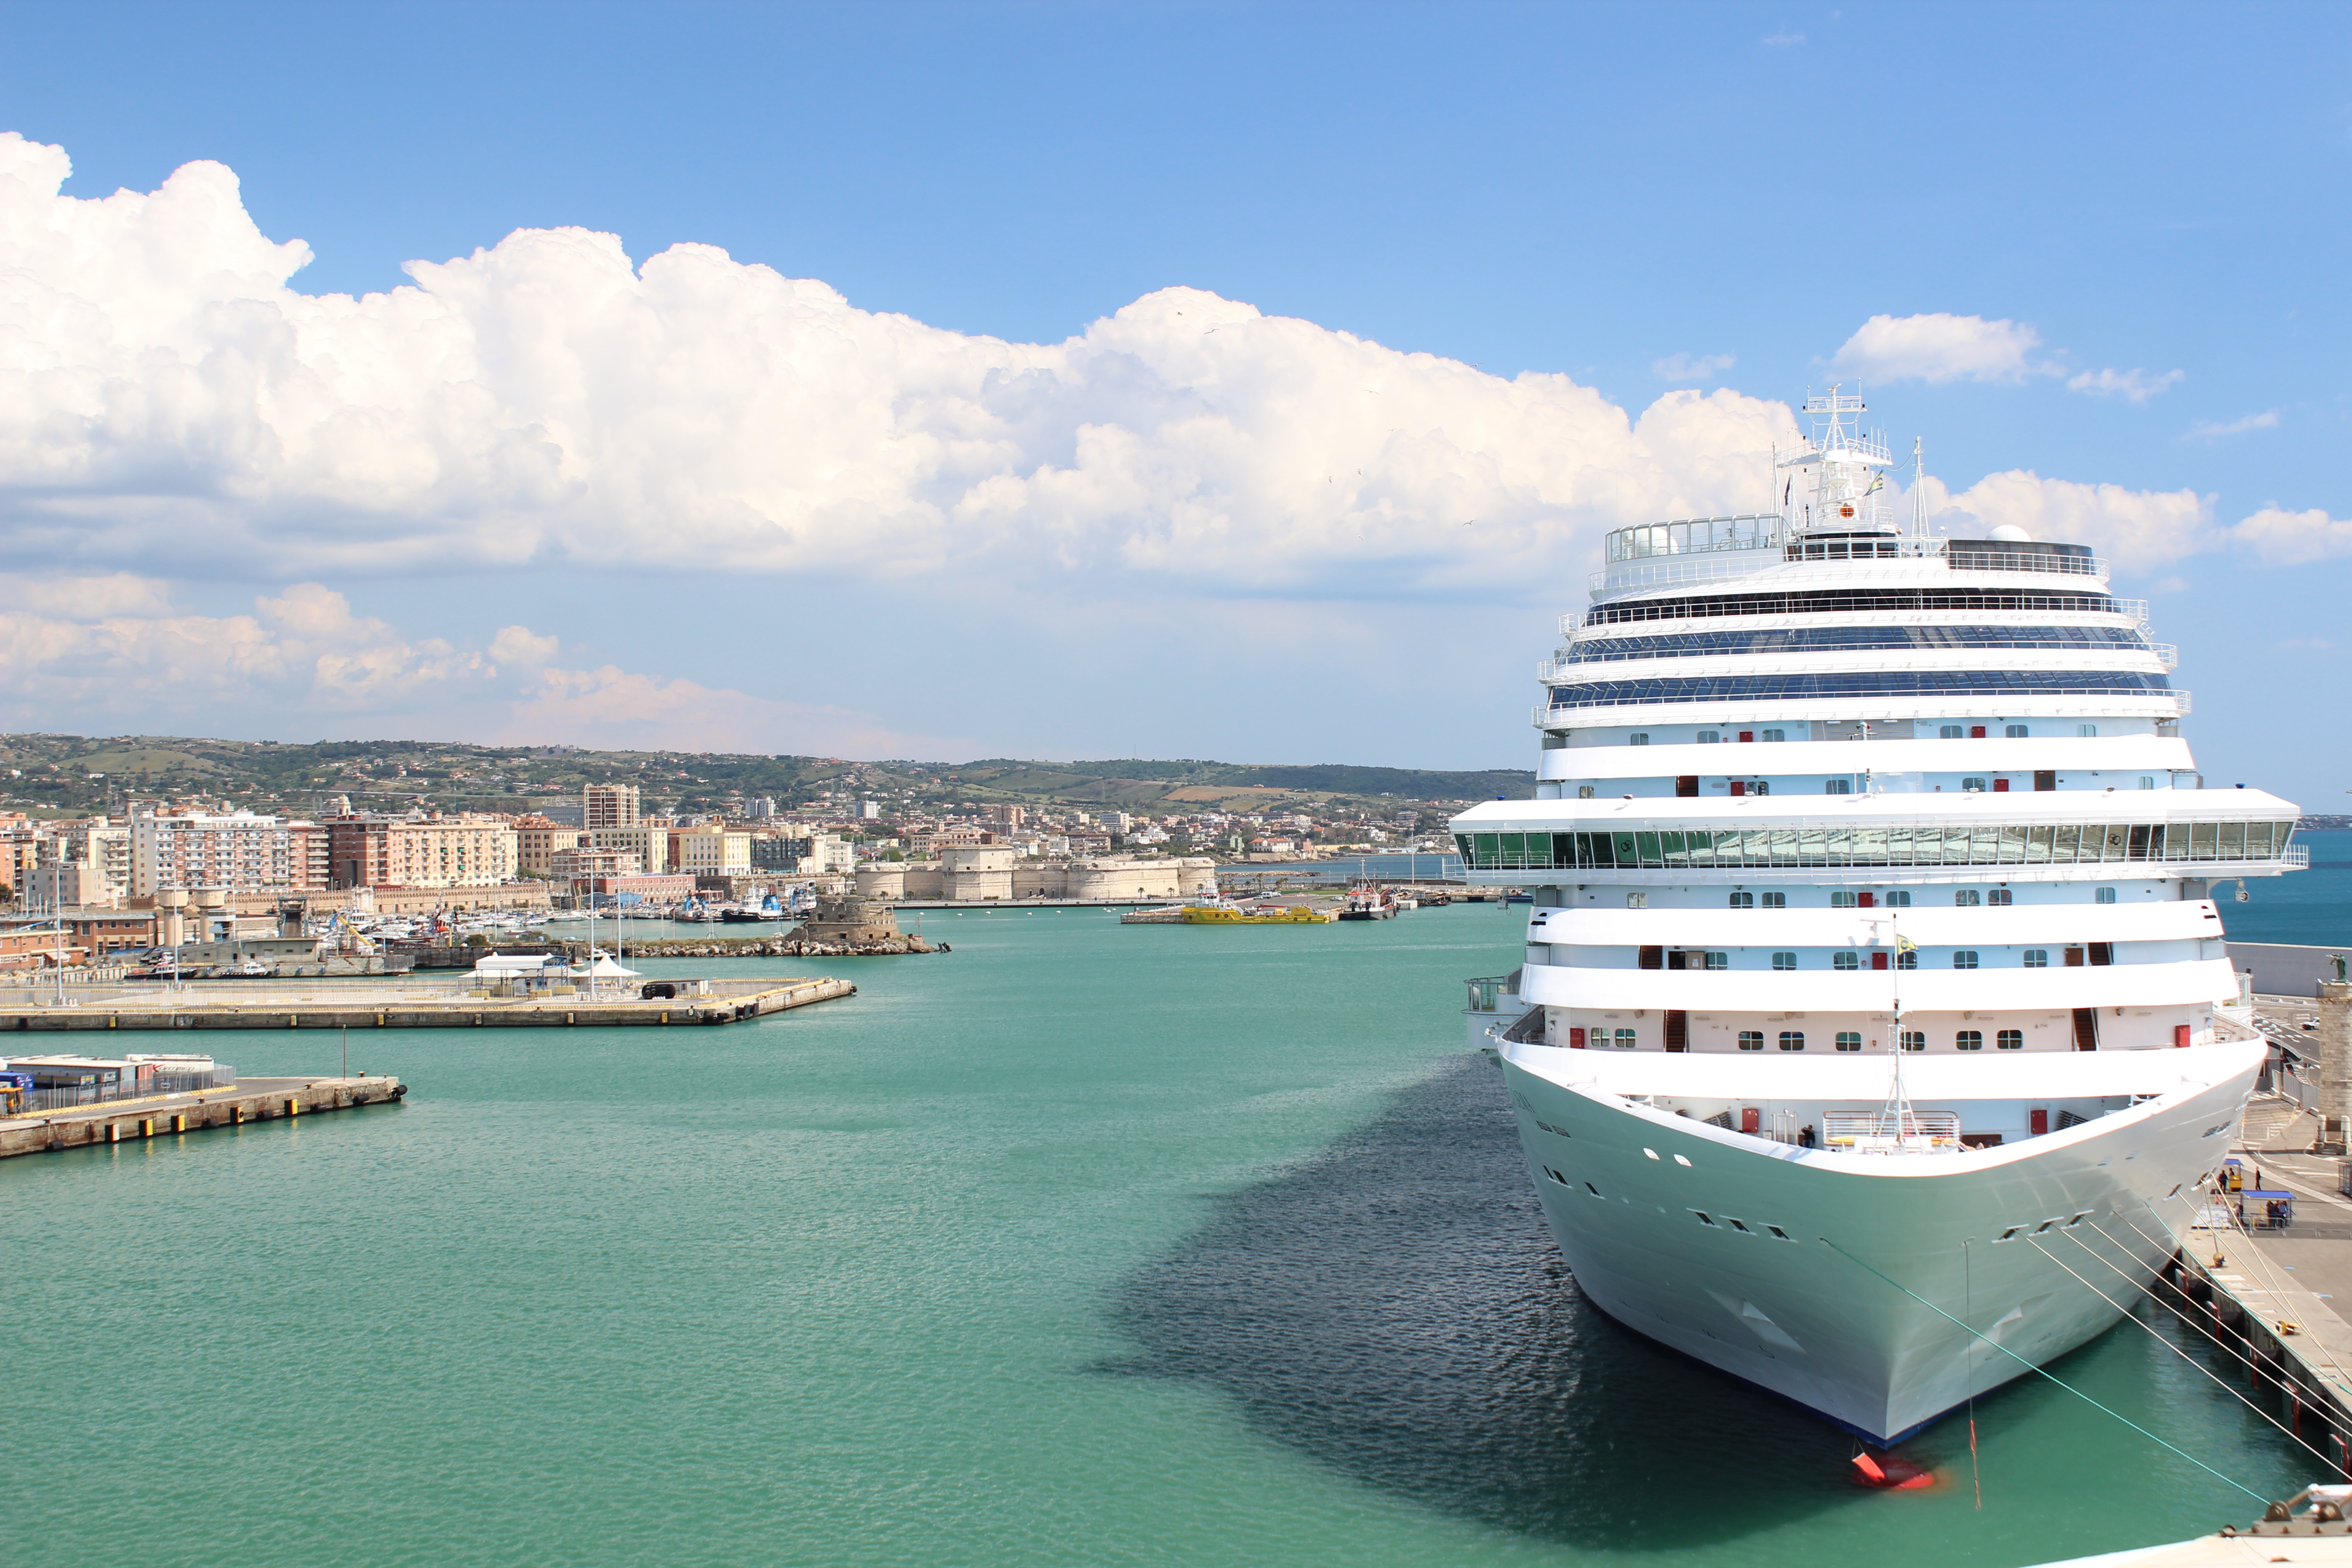 Arrivals and departures from the port of Civitavecchia in 